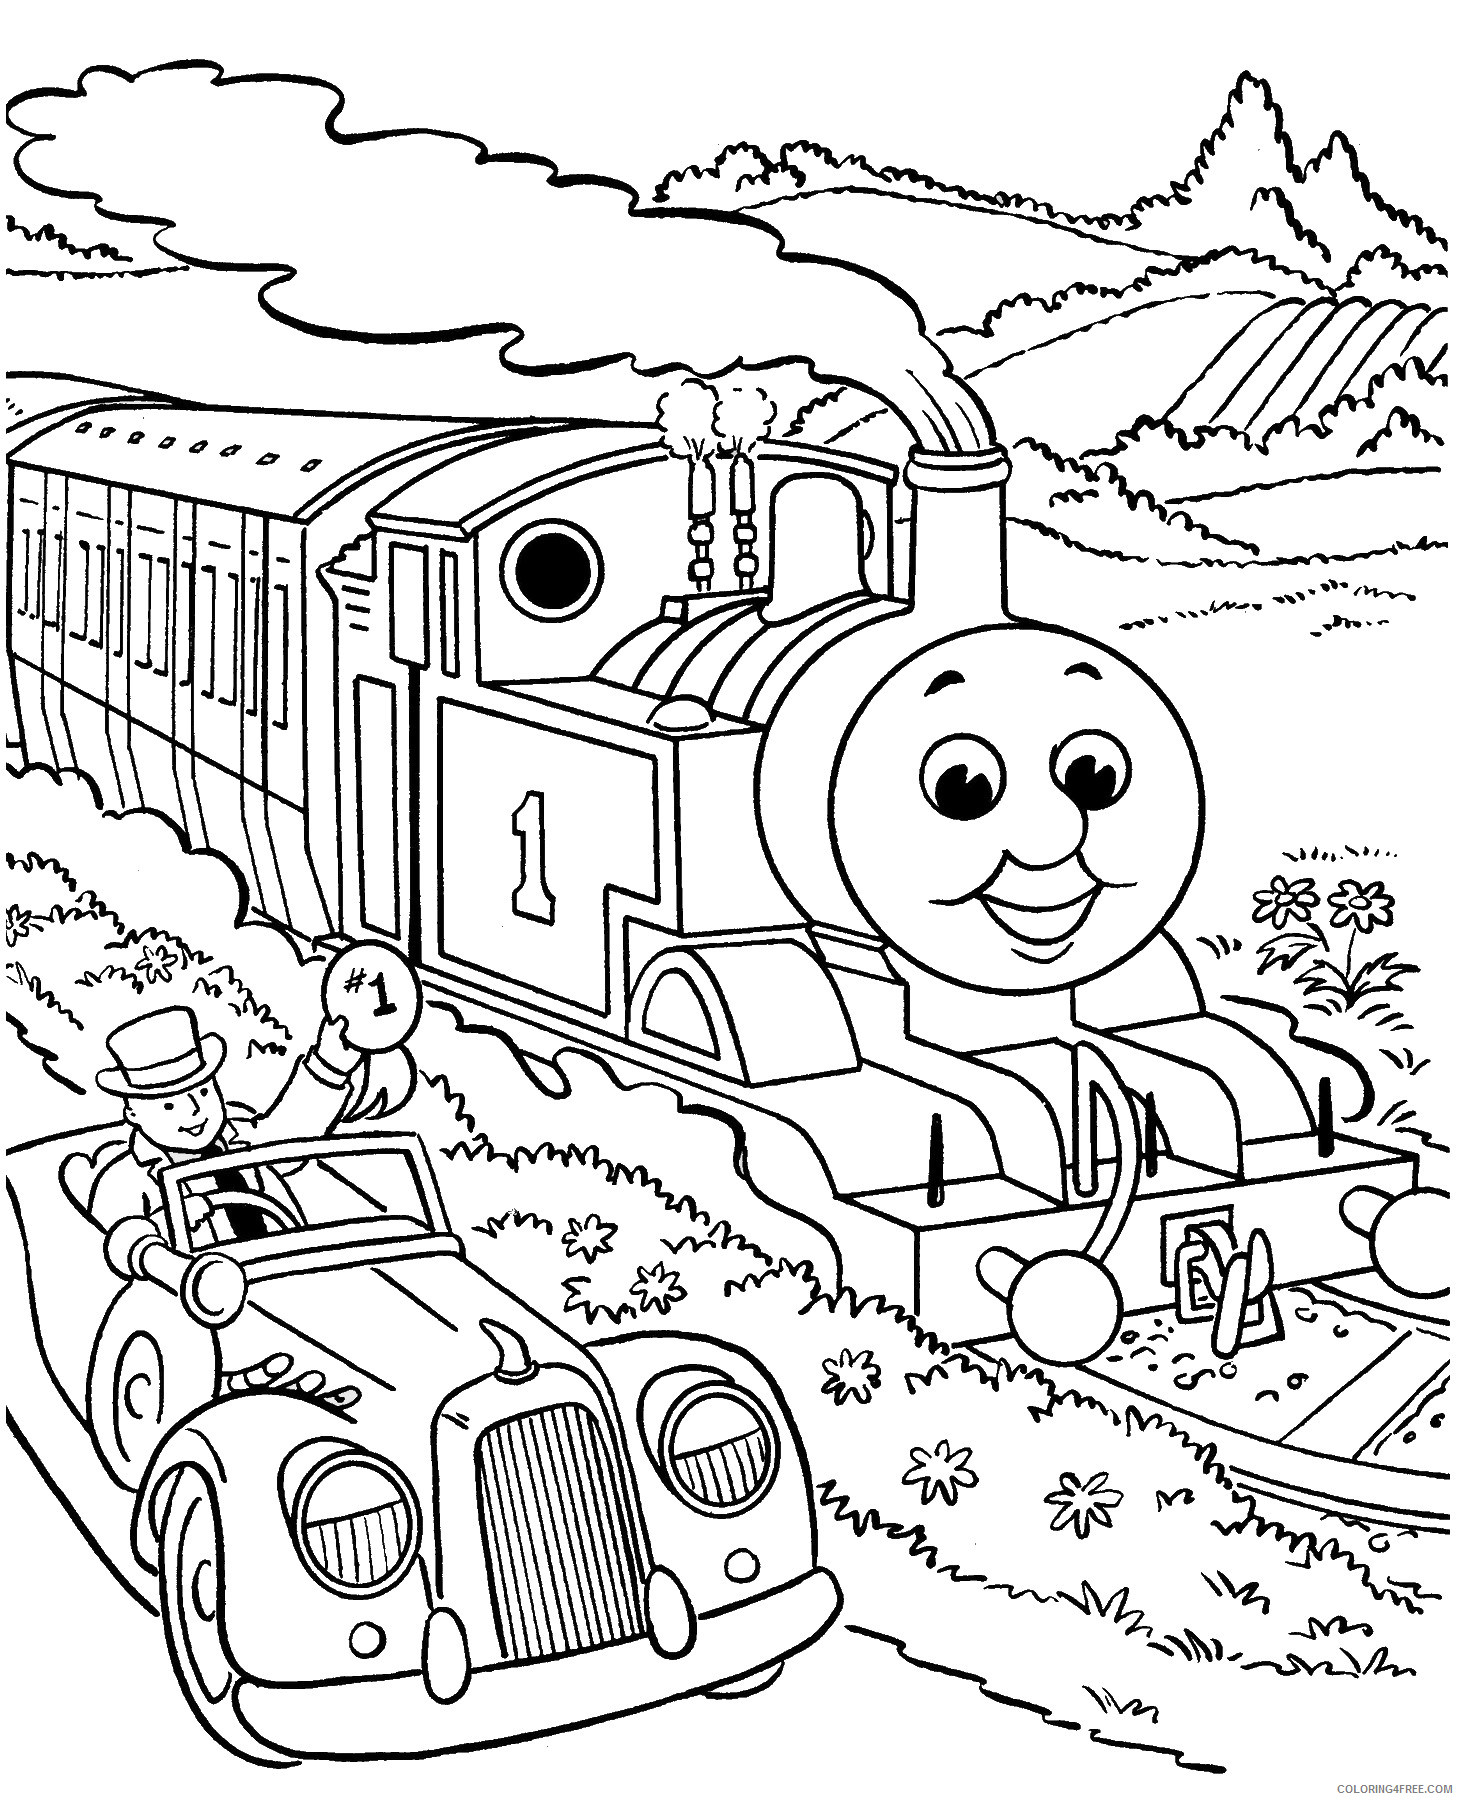 Thomas and Friends Coloring Pages Cartoons thomas_tank_engine_cl18 Printable 2020 6523 Coloring4free